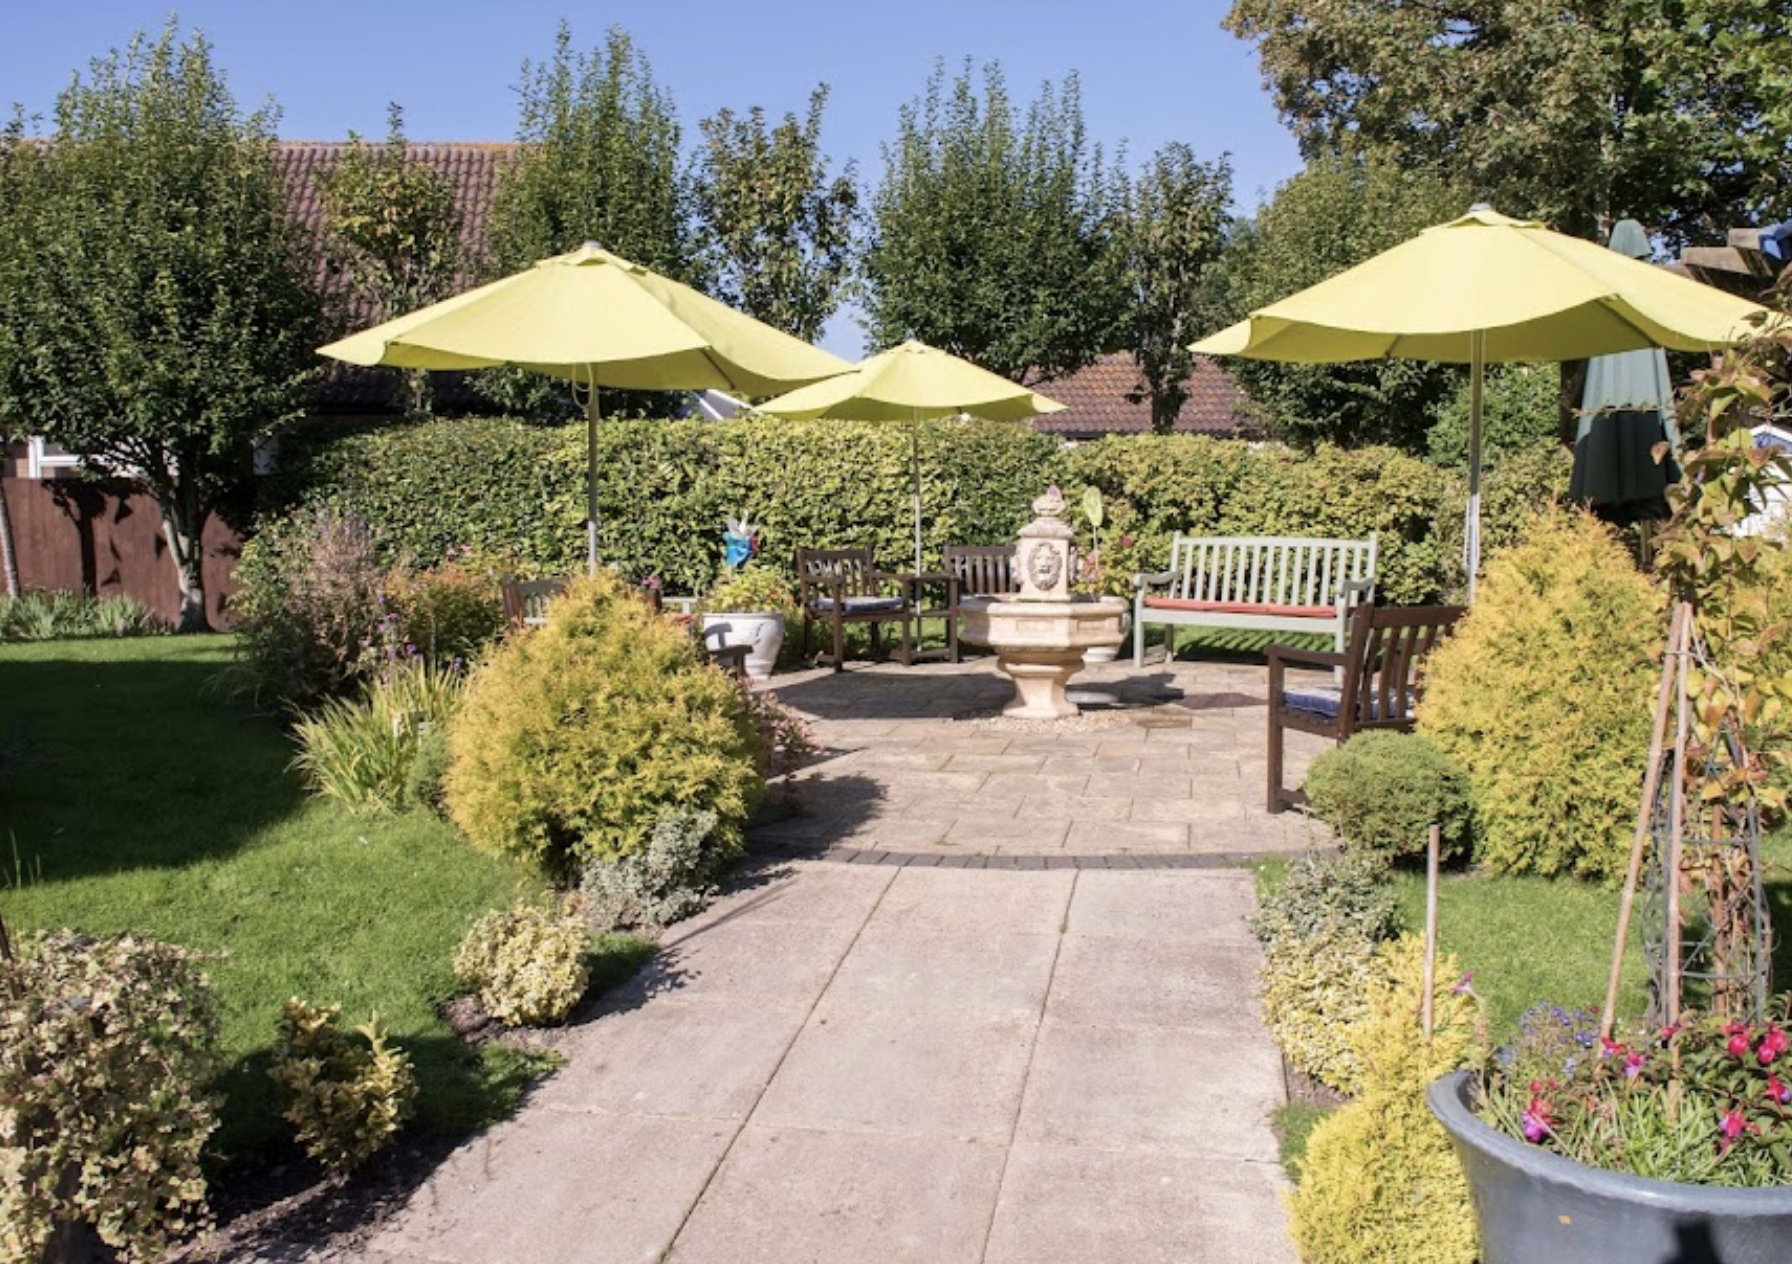 Garden at Elm View Care Home in Clevedon, Somerset